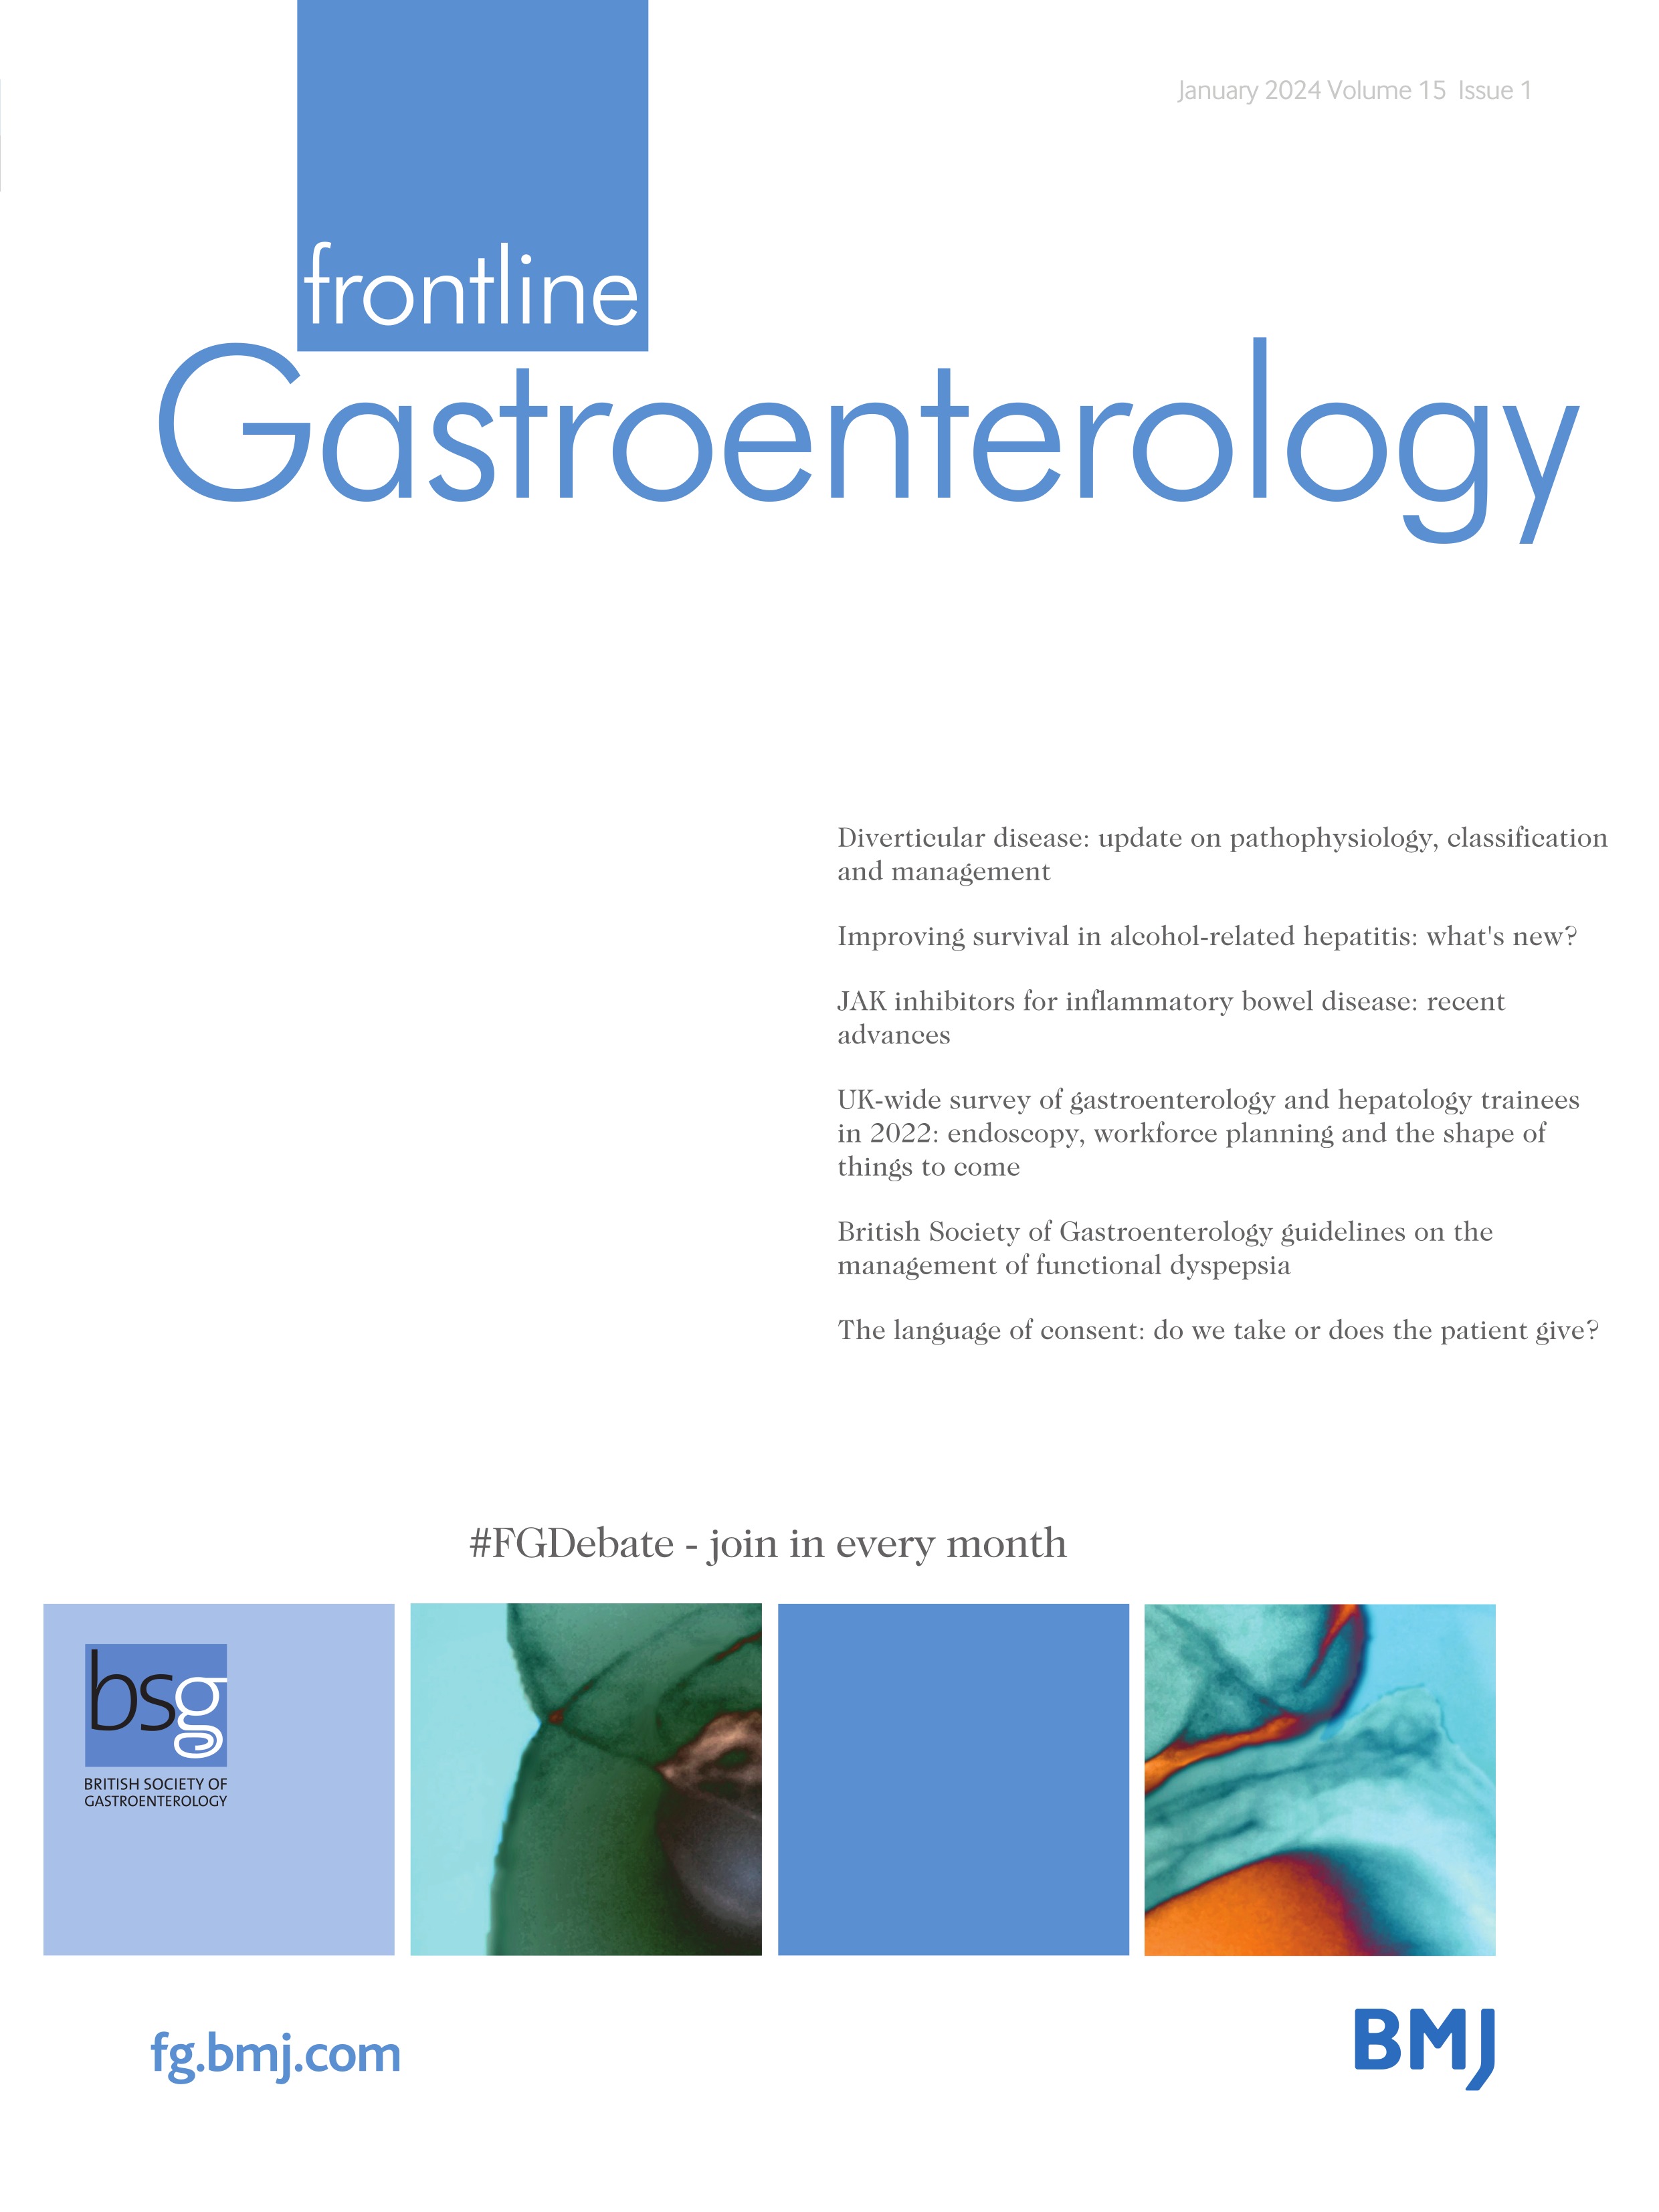 Dedicated service for Barretts oesophagus surveillance endoscopy yields higher dysplasia detection and guideline adherence in a non-tertiary setting in the UK: a 5-year comparative cohort study